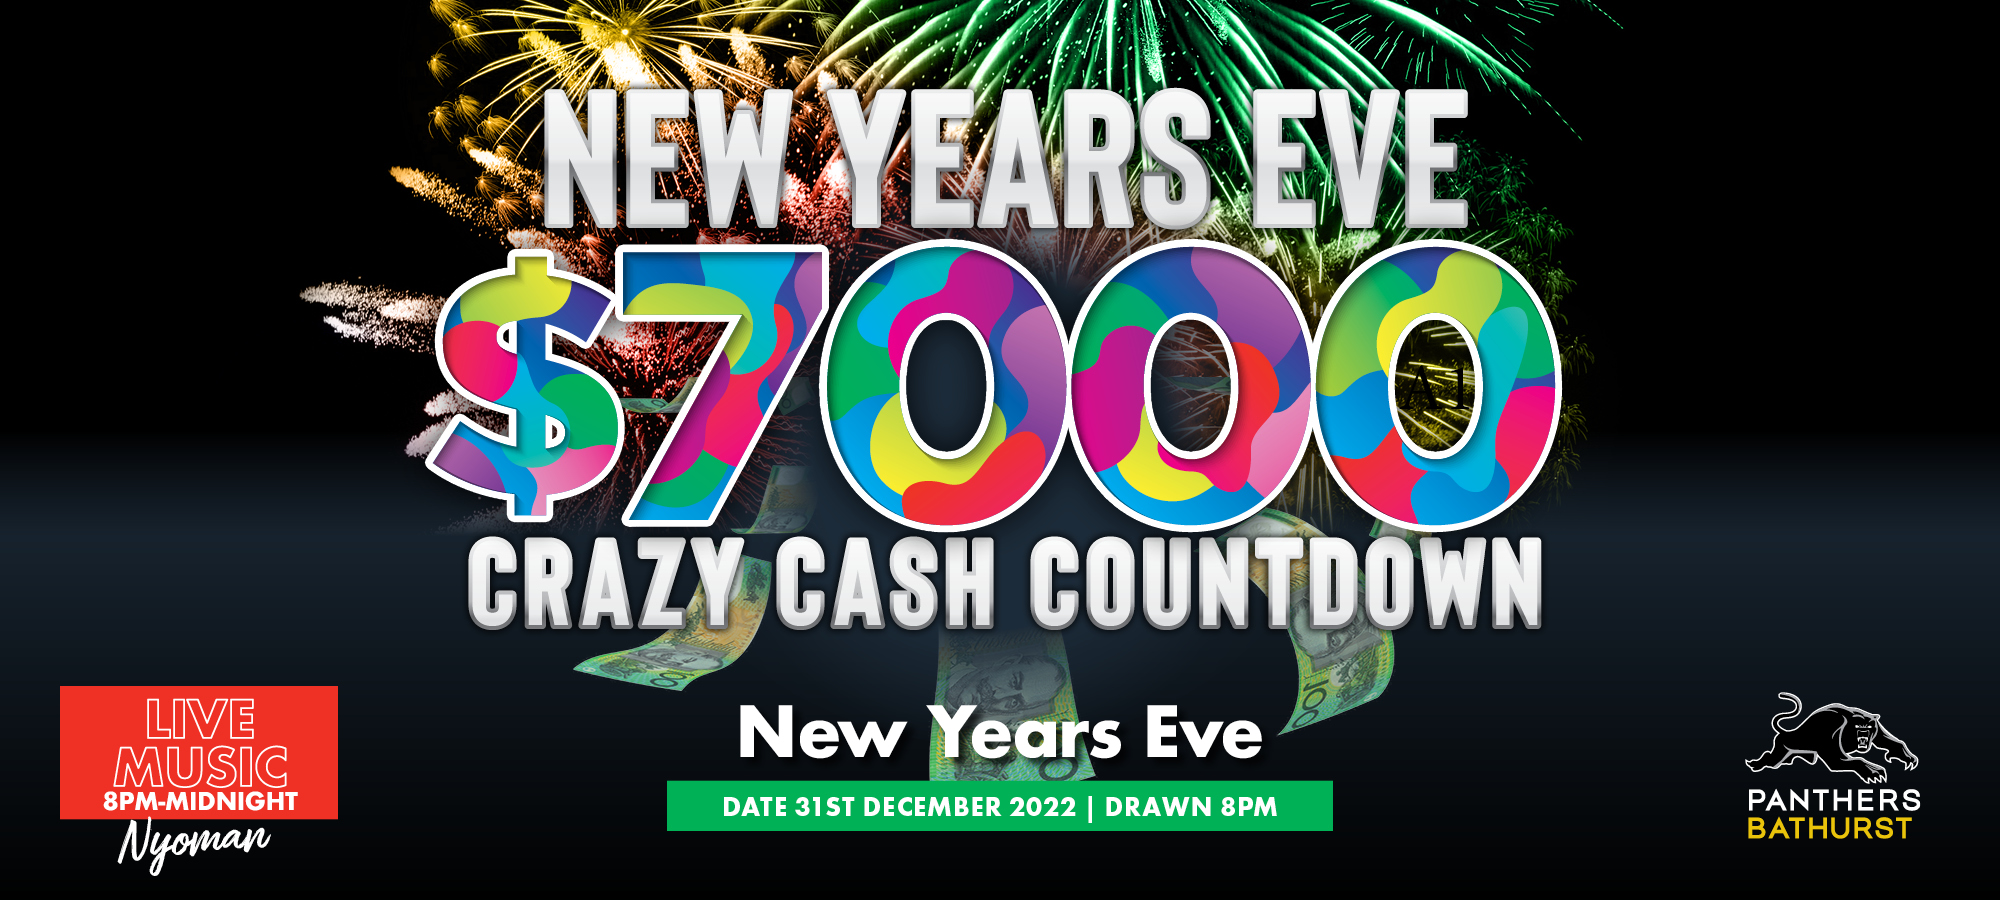 New Year’s Eve Crazy Cash Countdown